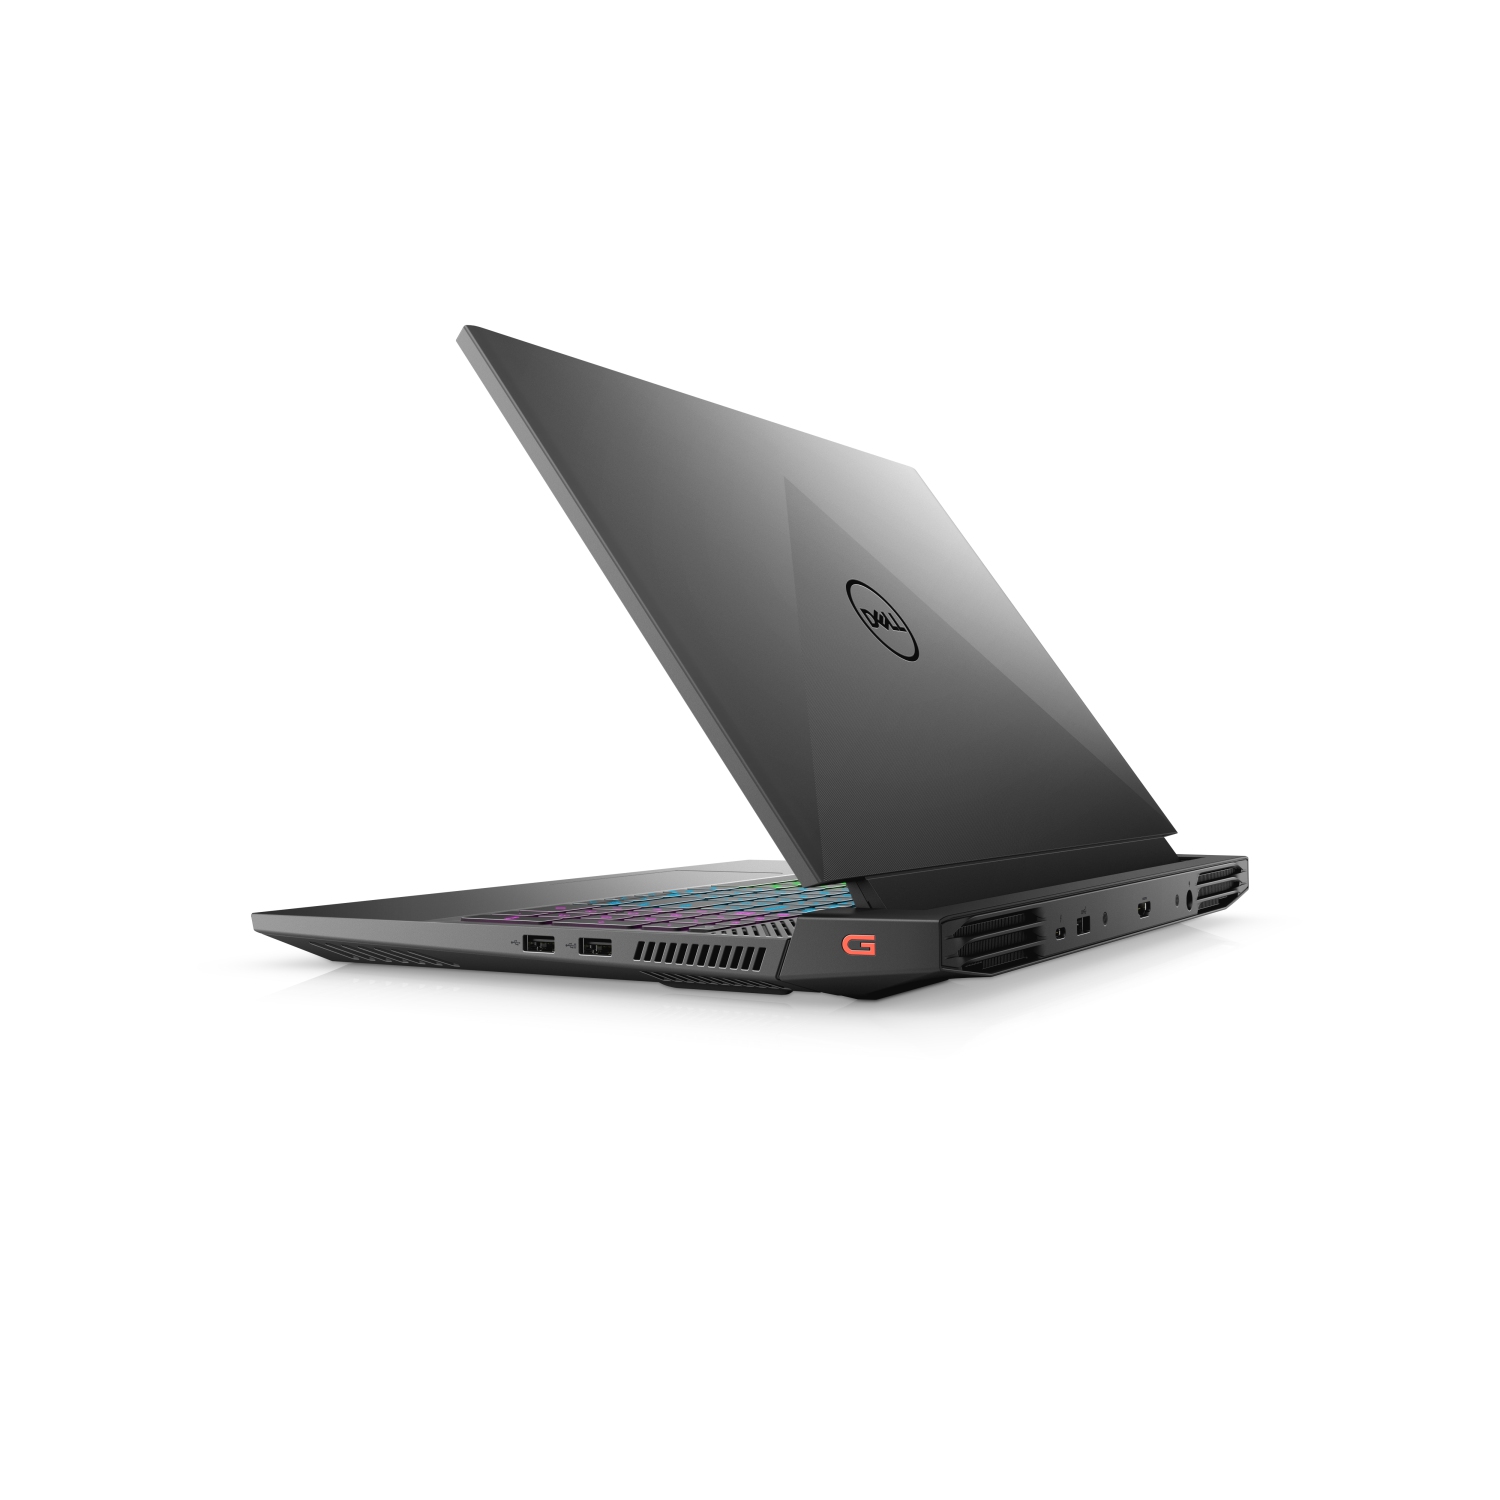 Refurbished (Excellent) - Dell G15 5511 Gaming Laptop (2021), 15.6" FHD, Core i5 - 512GB SSD - 8GB RAM - RTX 3050, 6 Cores @ 4.5 GHz - 11th Gen CPU Certified Refurbished